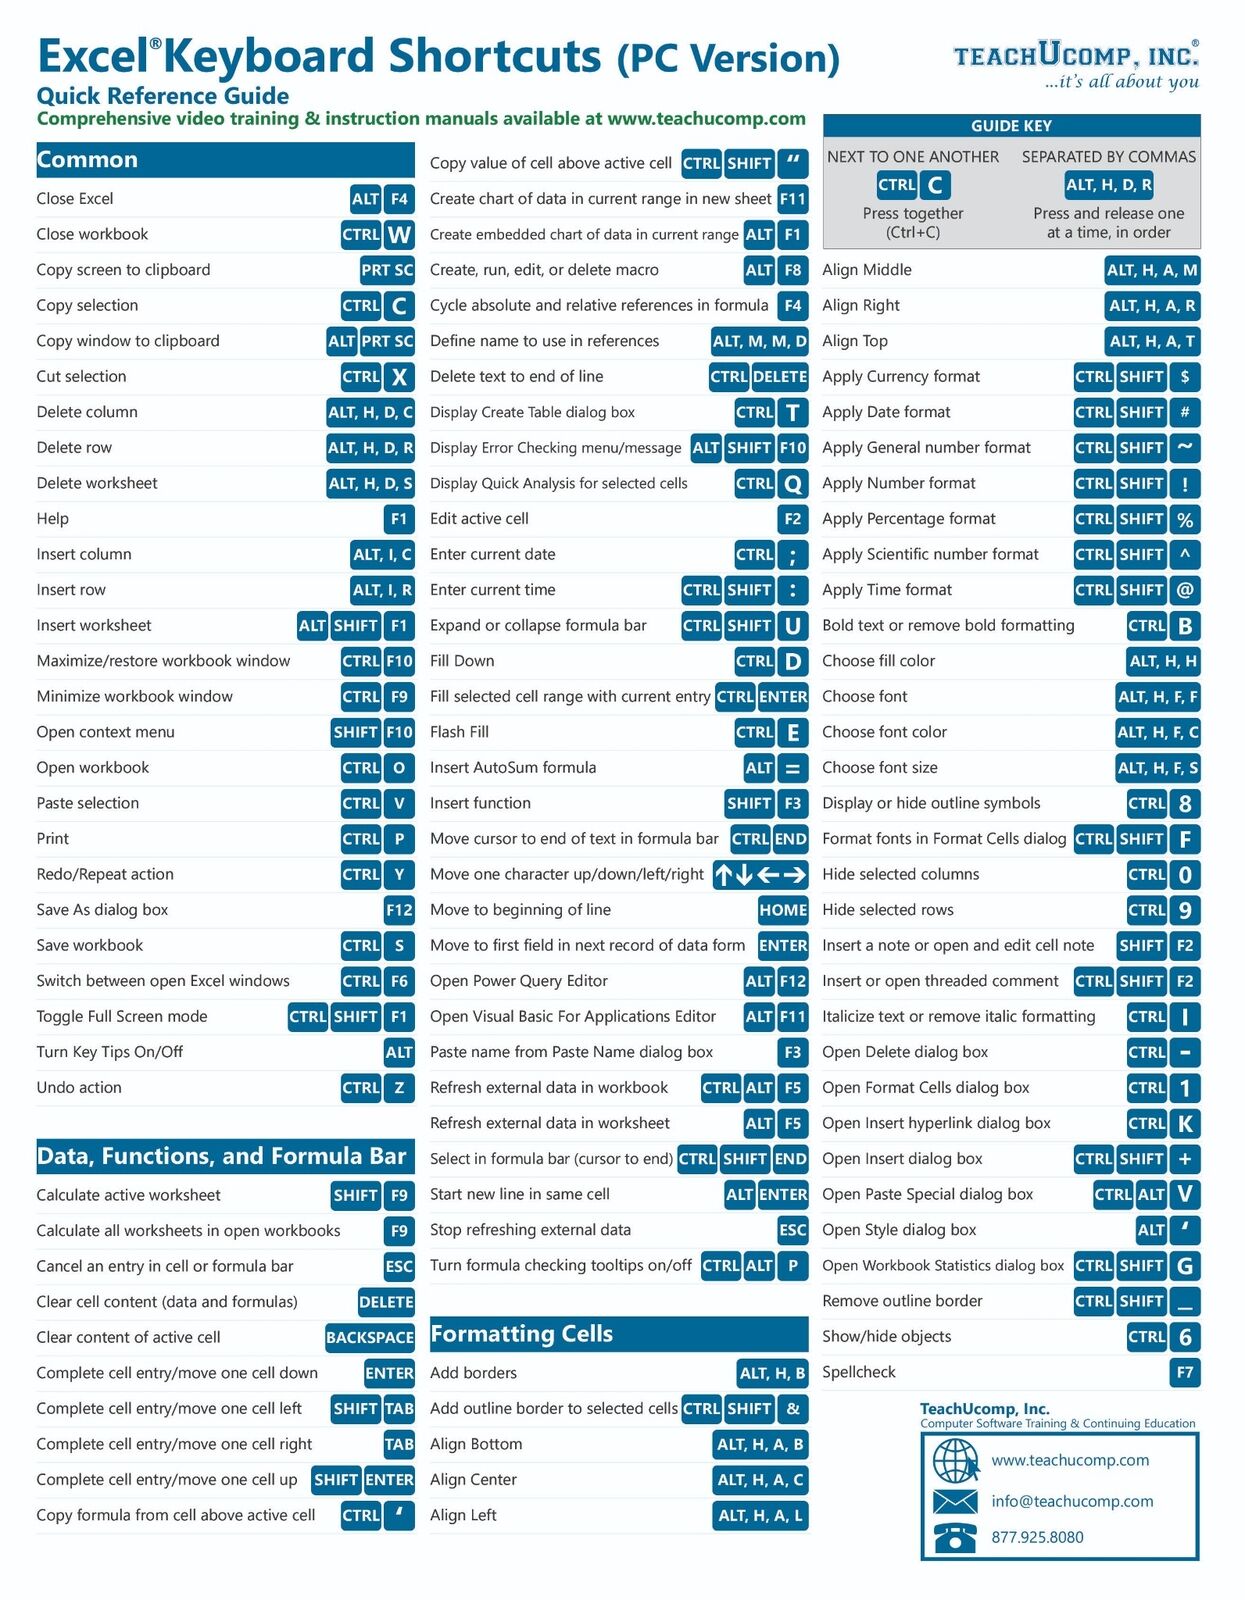 Microsoft Excel for PC Keyboard Shortcuts Guide Quick Reference Card Cheat Sheet